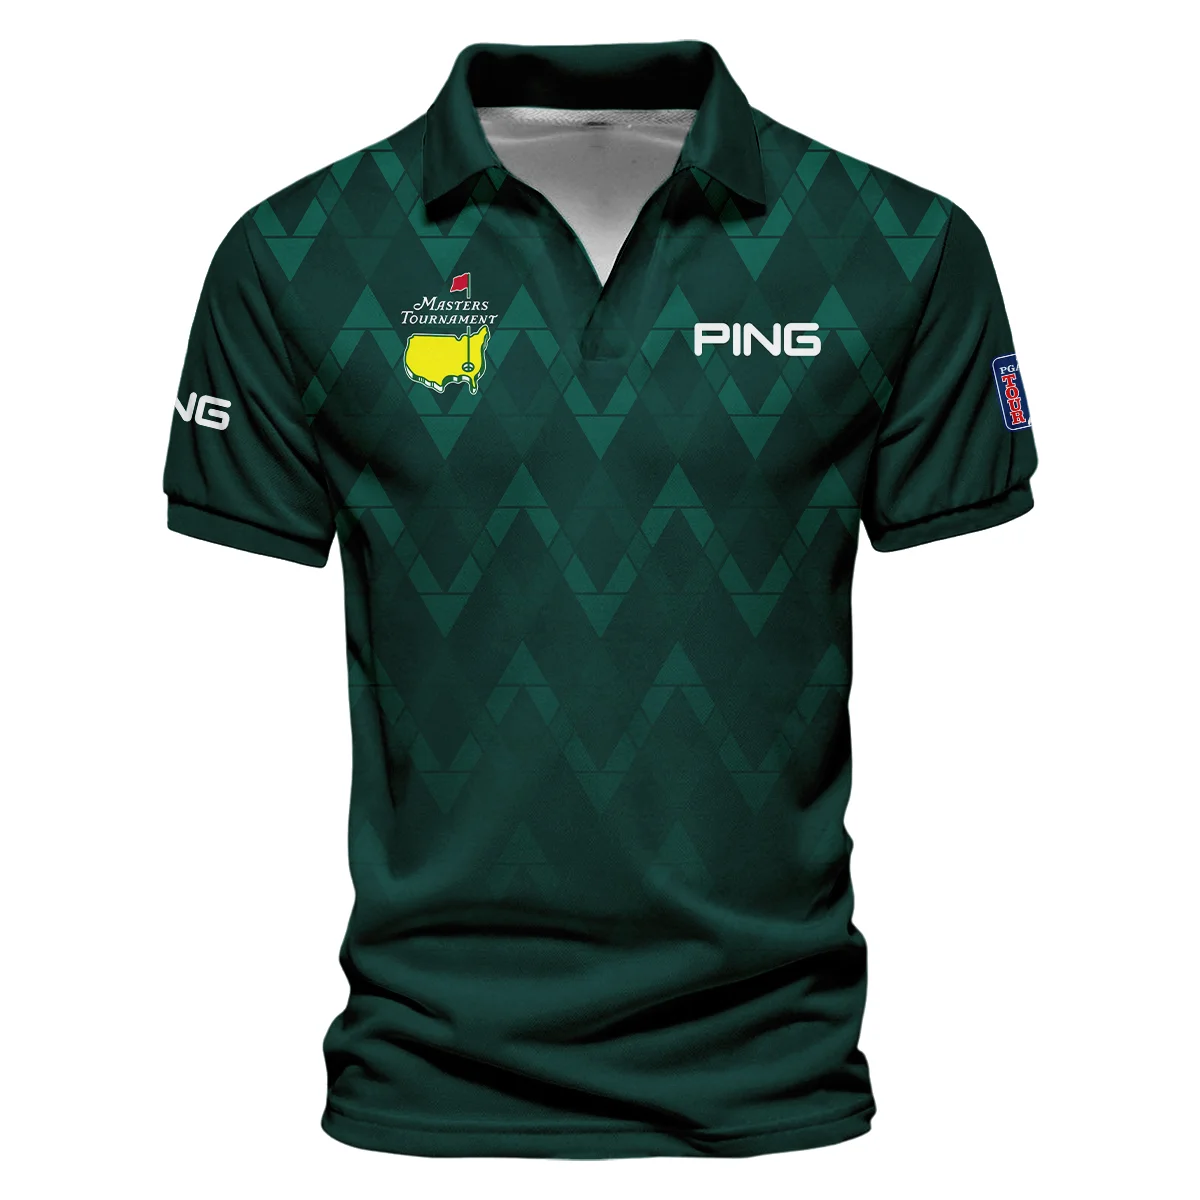 Abstract Dark Green Zigzag Background Masters Tournament Ping Vneck Polo Shirt Style Classic Polo Shirt For Men